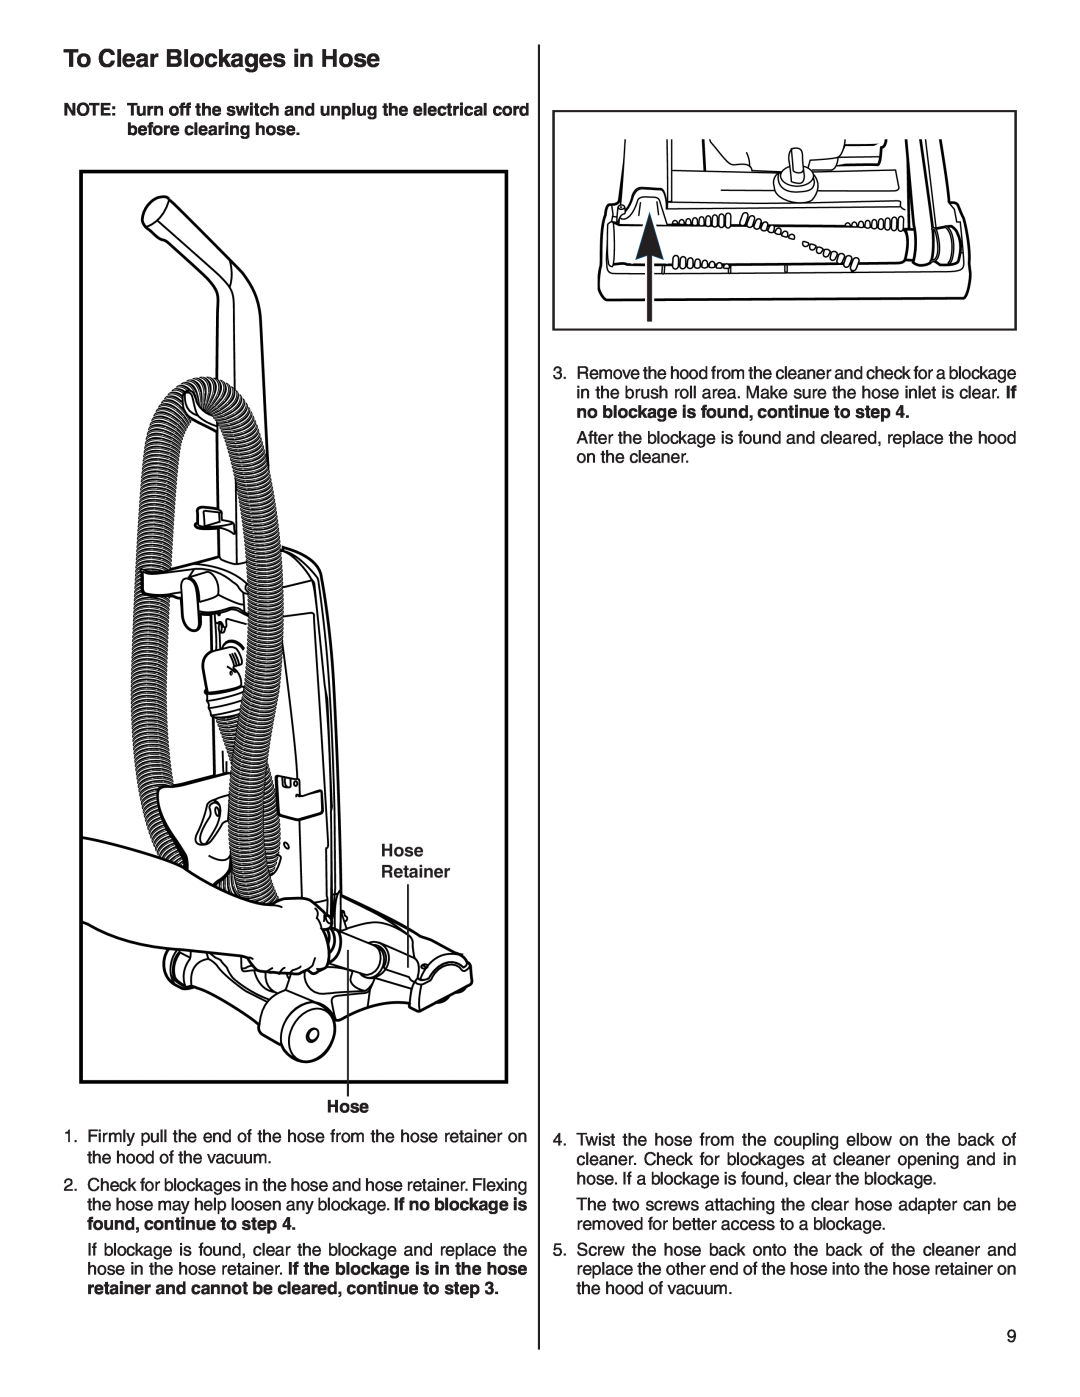 Electrolux Z2900 Series manual To Clear Blockages in Hose, Retainer 